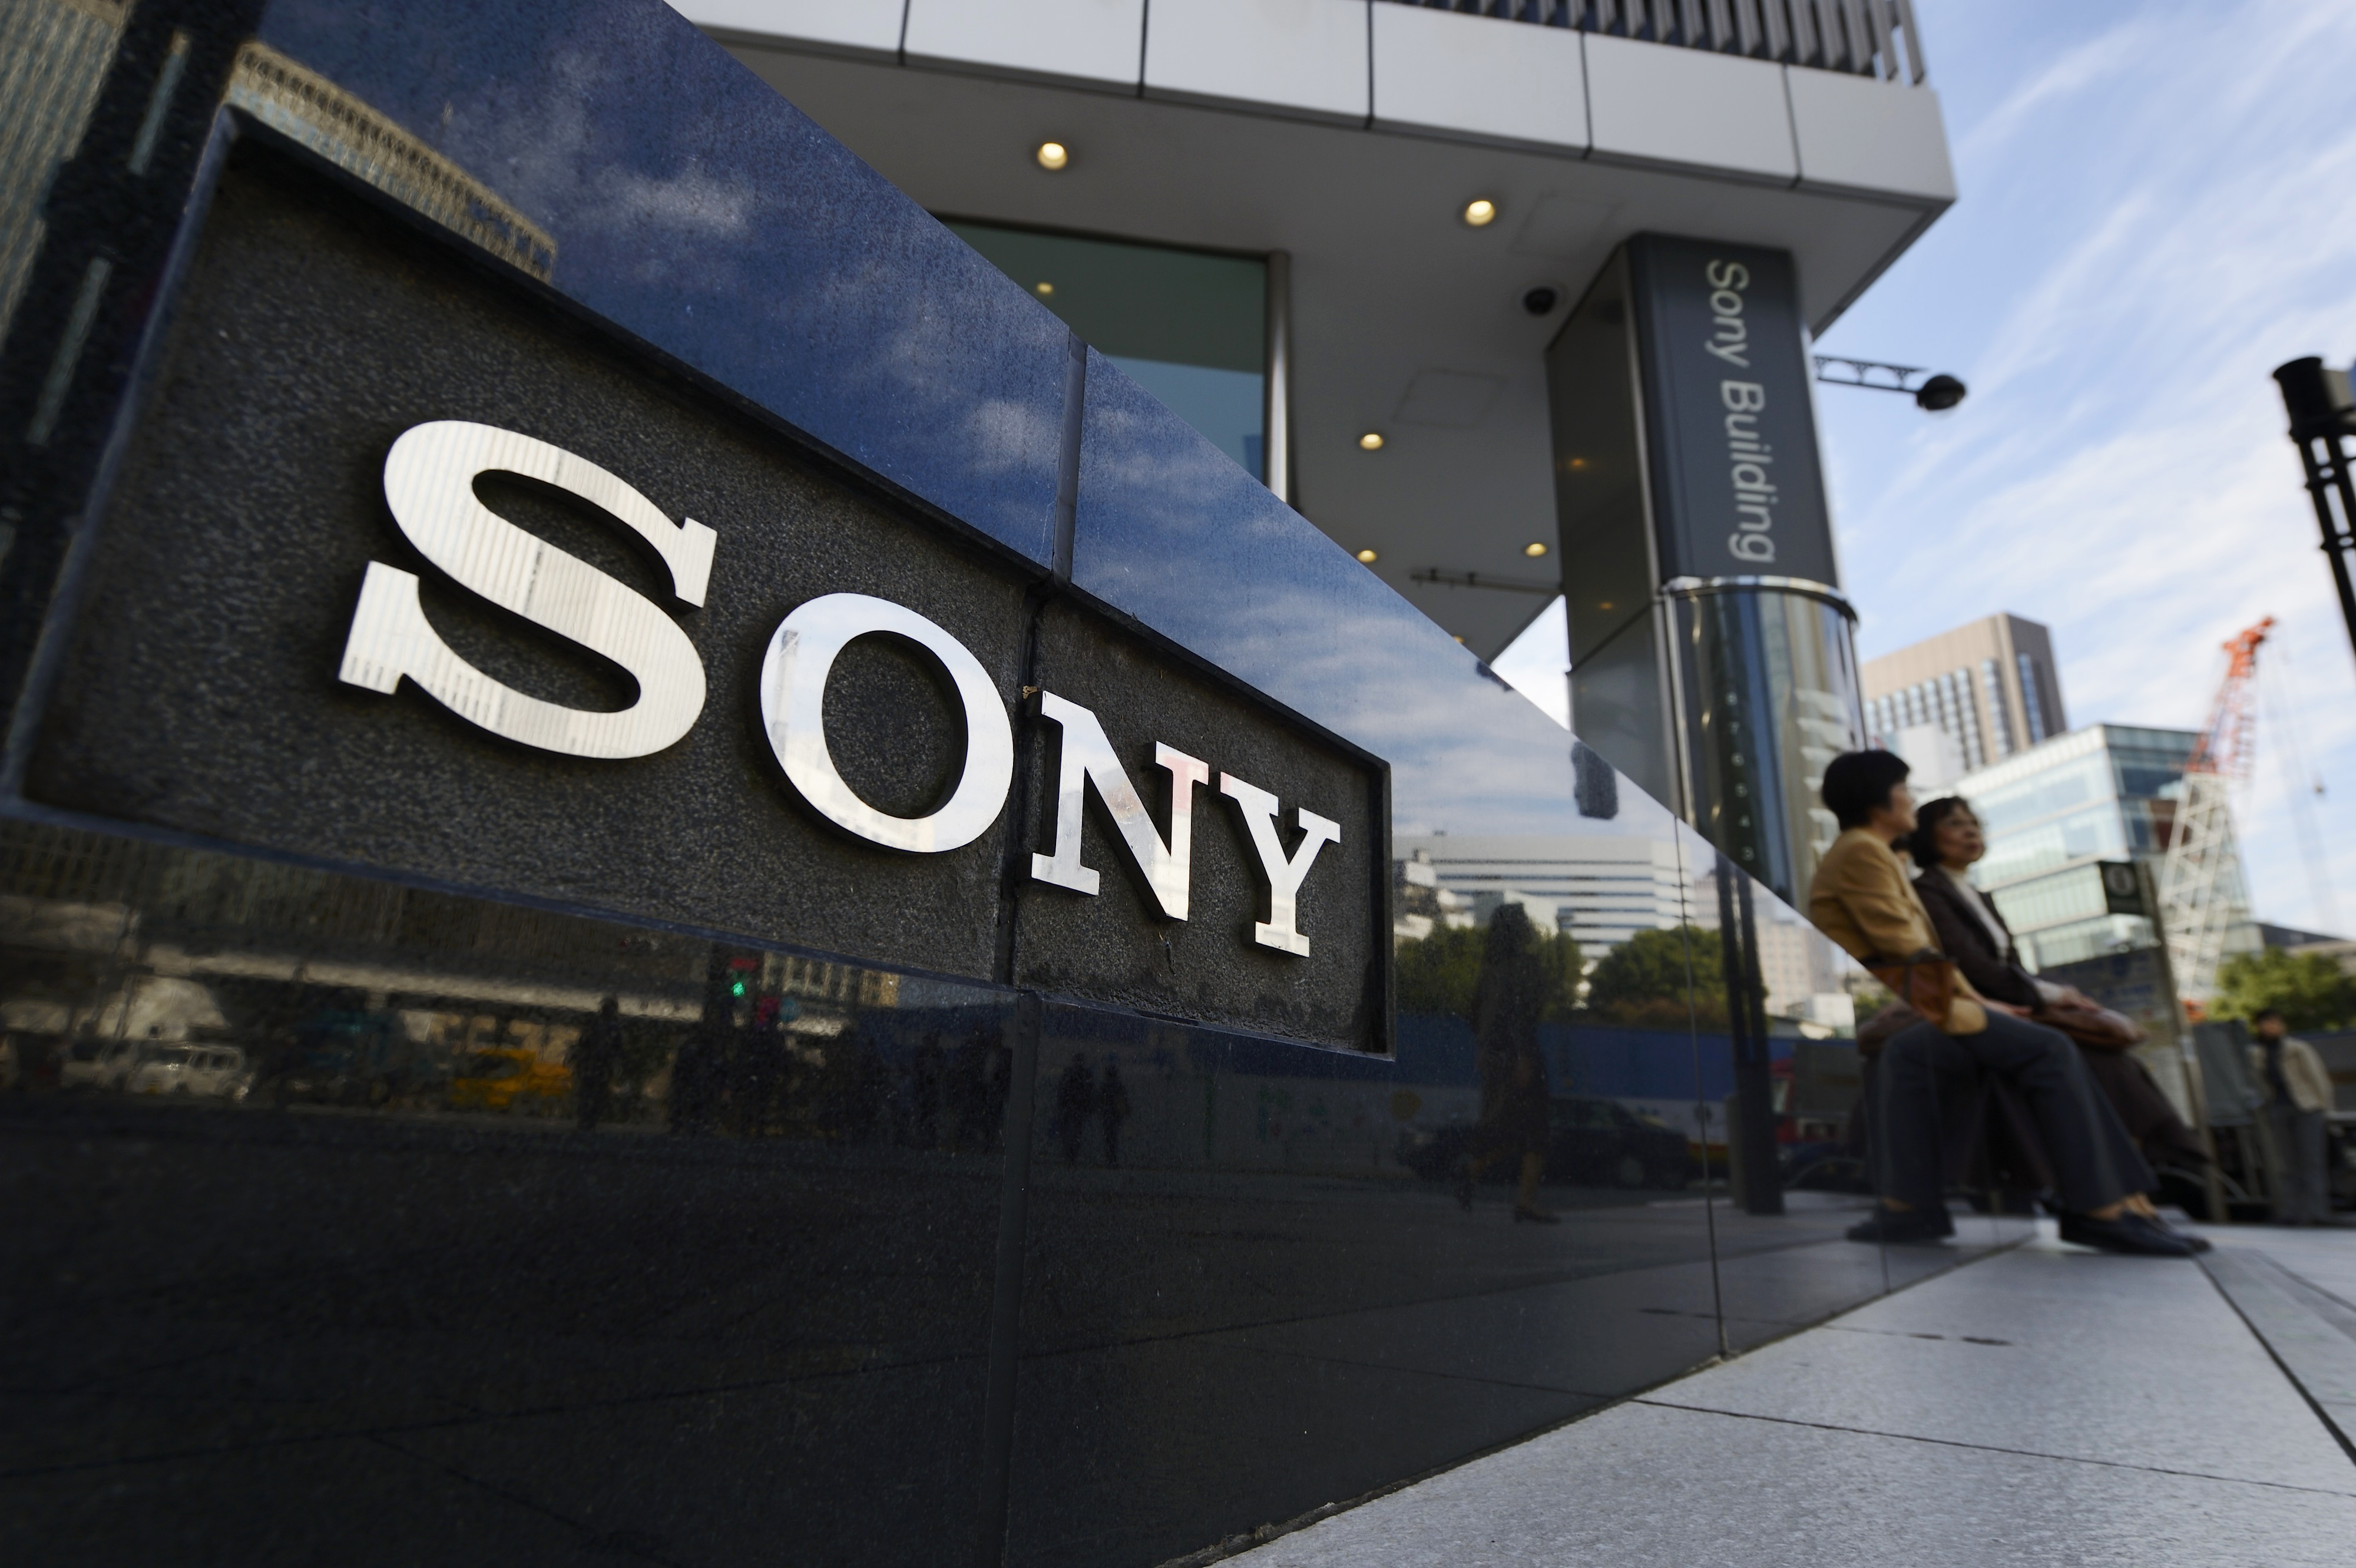 The Sony Corp. logo is displayed outside the company's showroom in Tokyo on Oct. 30, 2013. (Bloomberg/Getty Images)